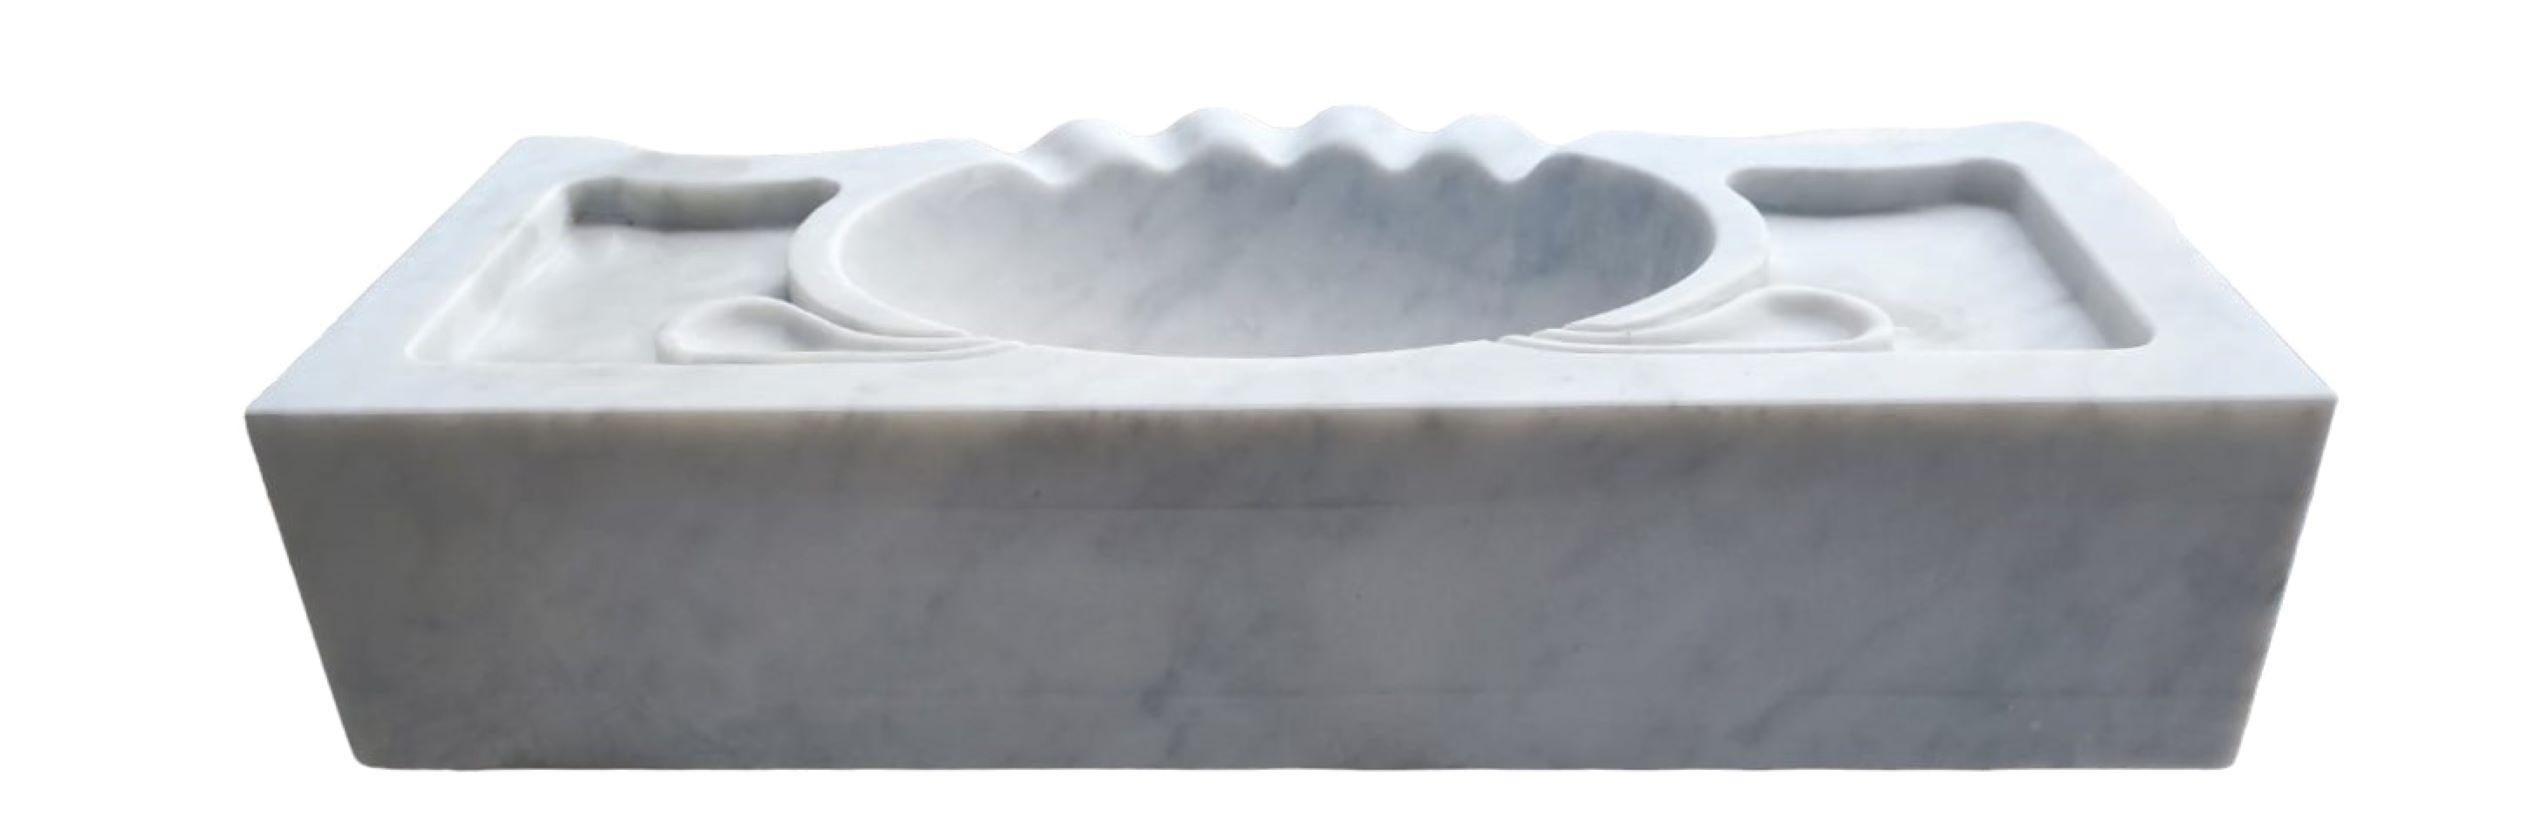 Italian Classical Serpentine Marble Stone Sink Basin For Sale